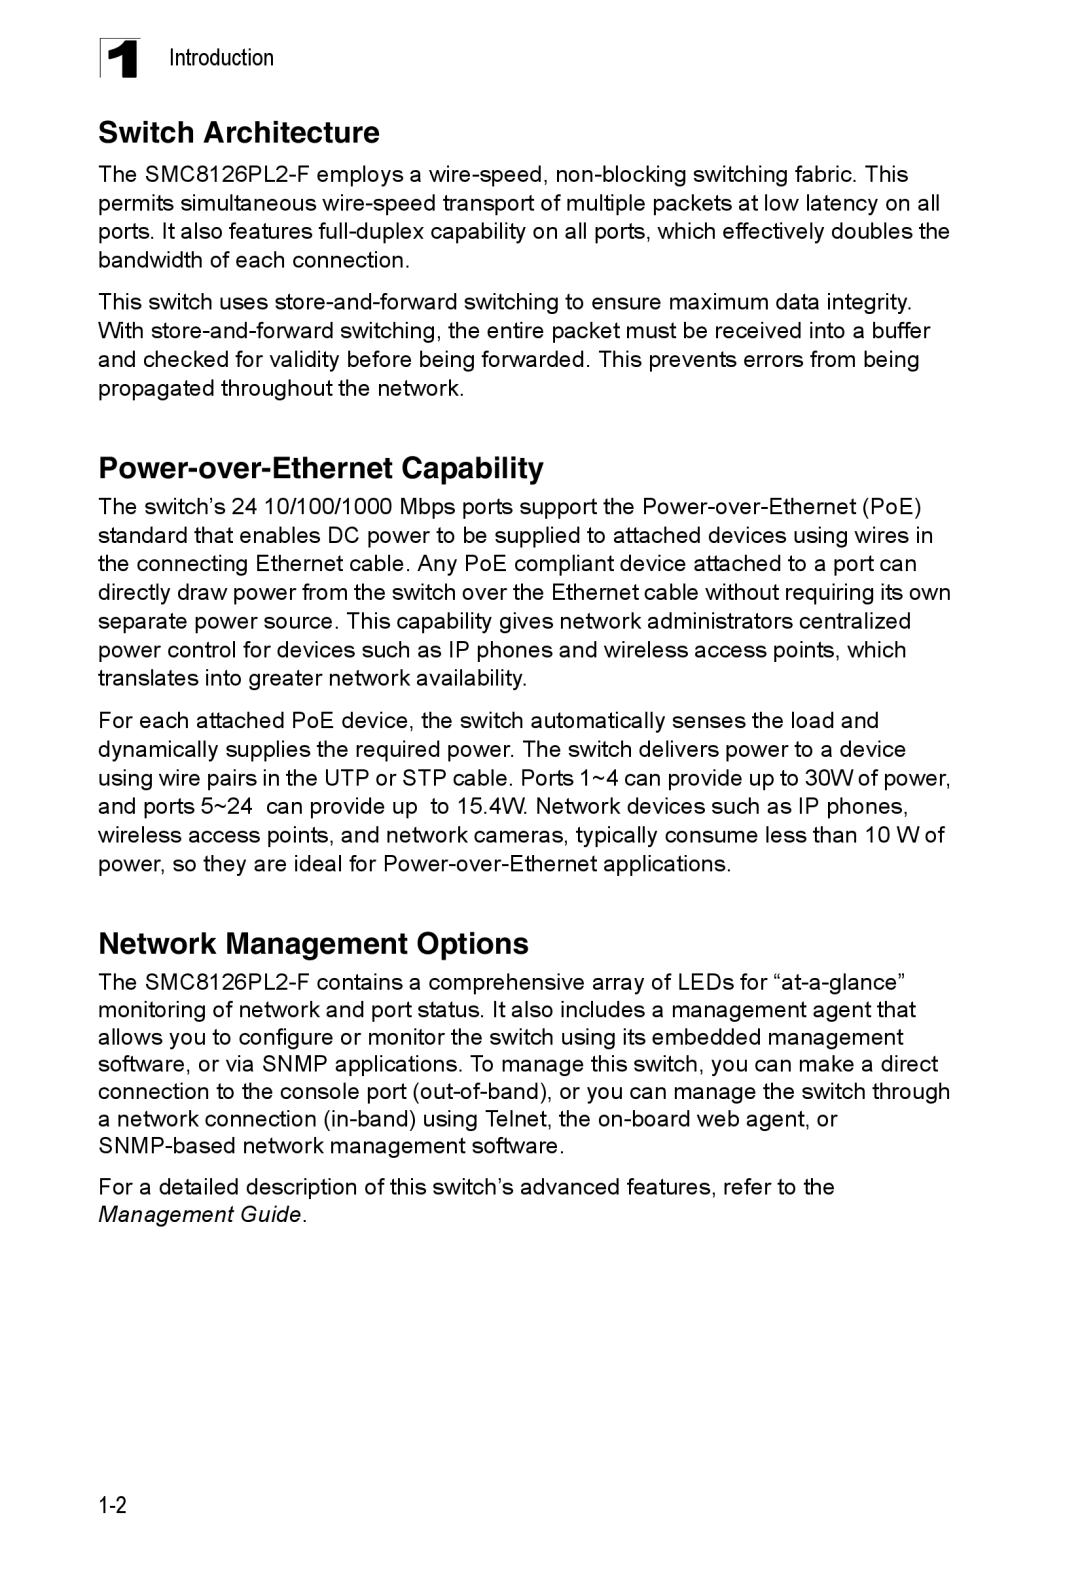 SMC Networks SMC8126PL2-F Switch Architecture, Power-over-EthernetCapability, Network Management Options, Introduction 